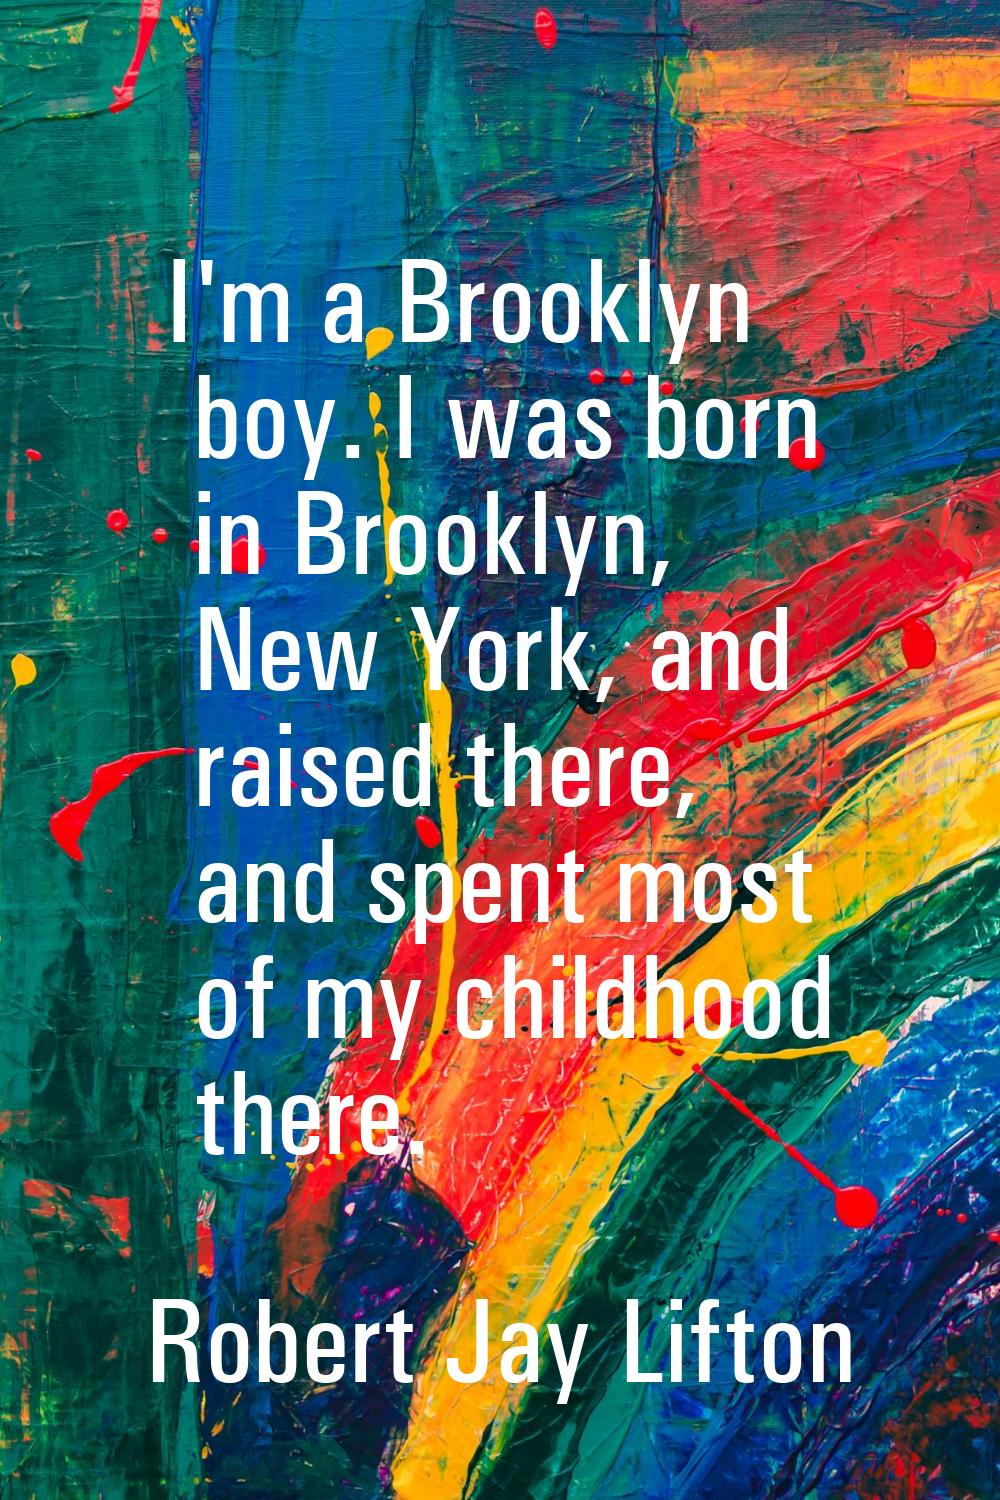 I'm a Brooklyn boy. I was born in Brooklyn, New York, and raised there, and spent most of my childh